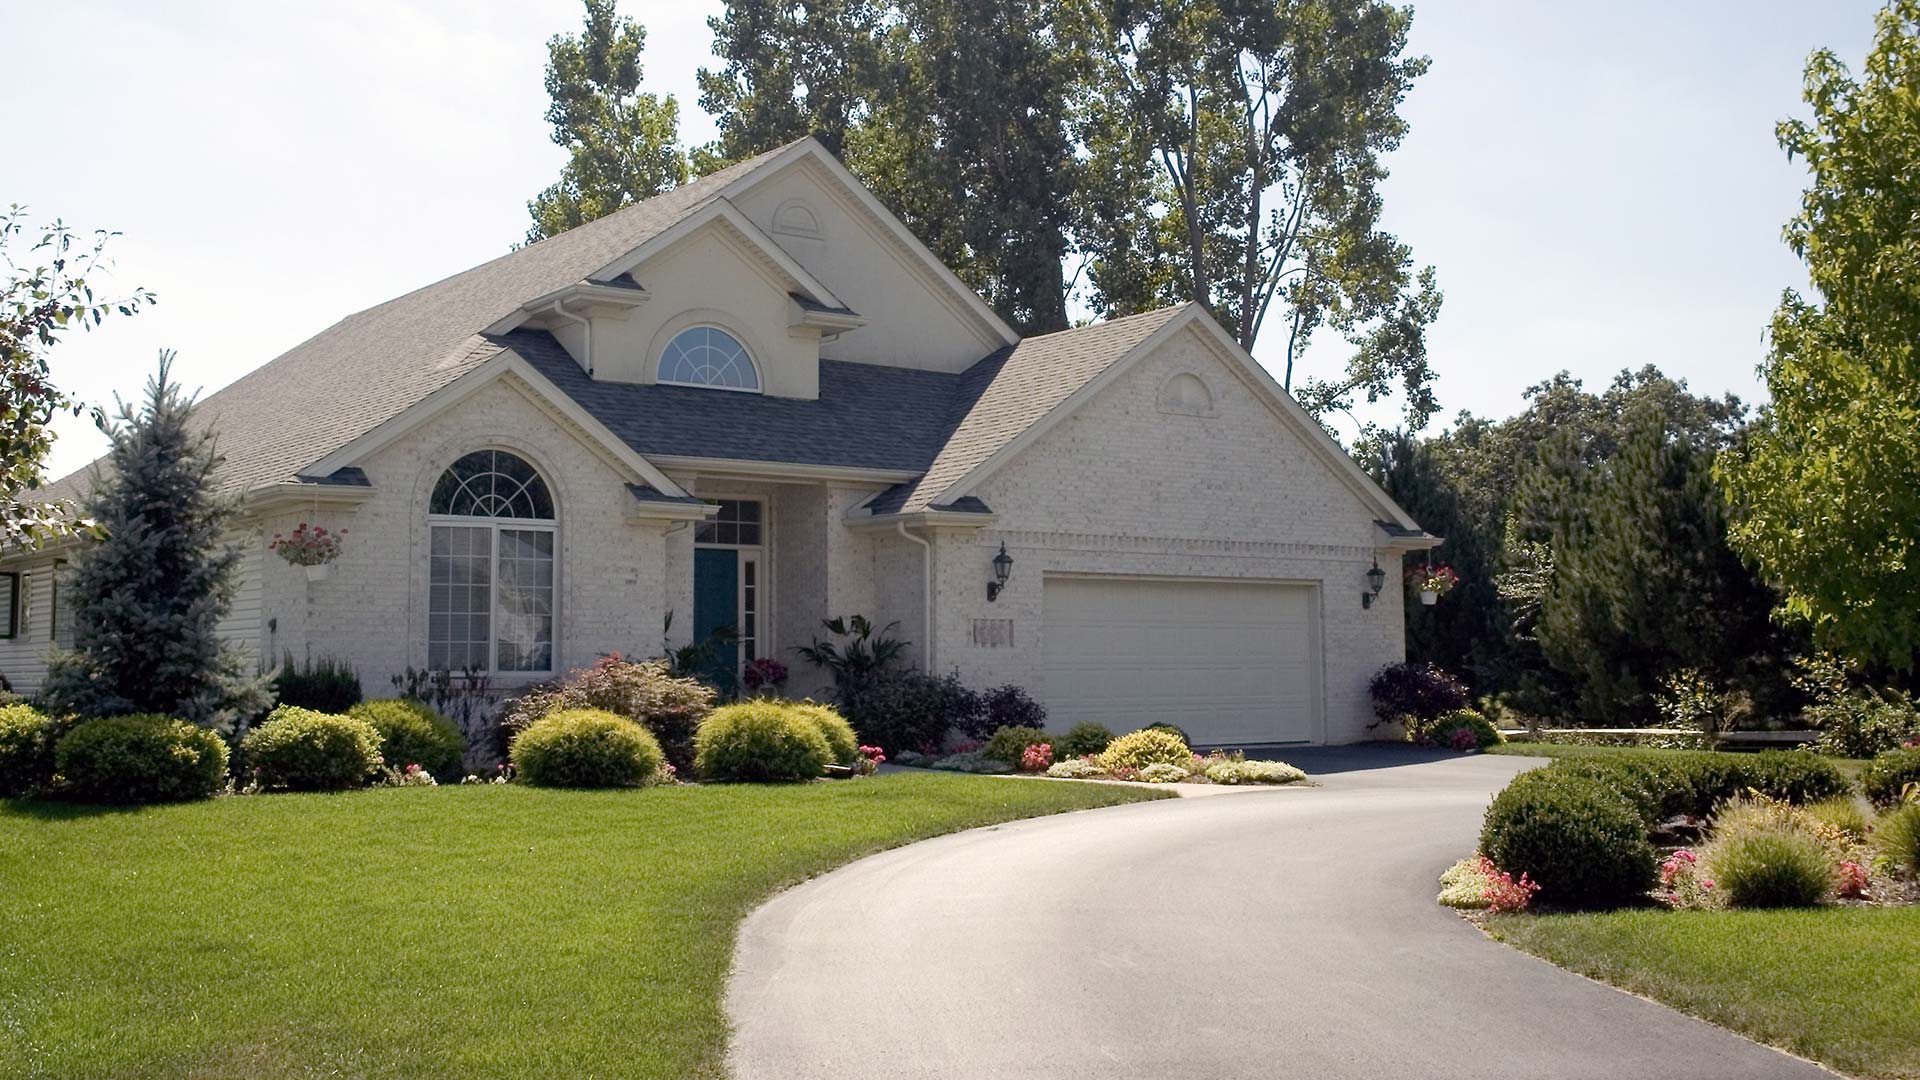 A home with regular lawn care in Marion, OH.